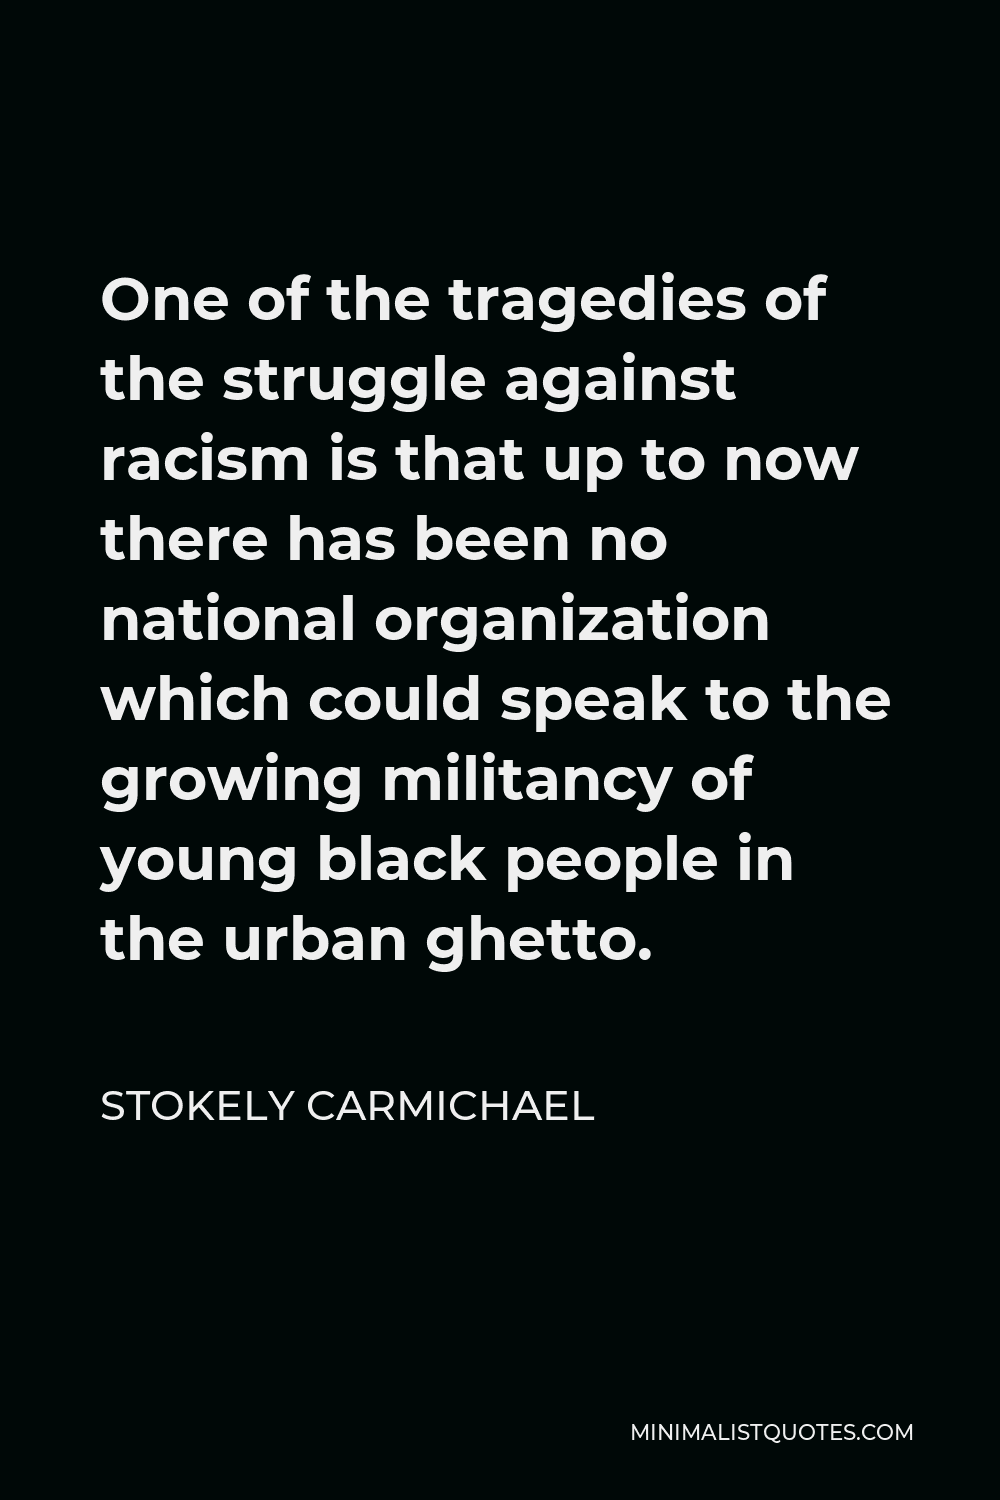 Stokely Carmichael Quote - One of the tragedies of the struggle against racism is that up to now there has been no national organization which could speak to the growing militancy of young black people in the urban ghetto.